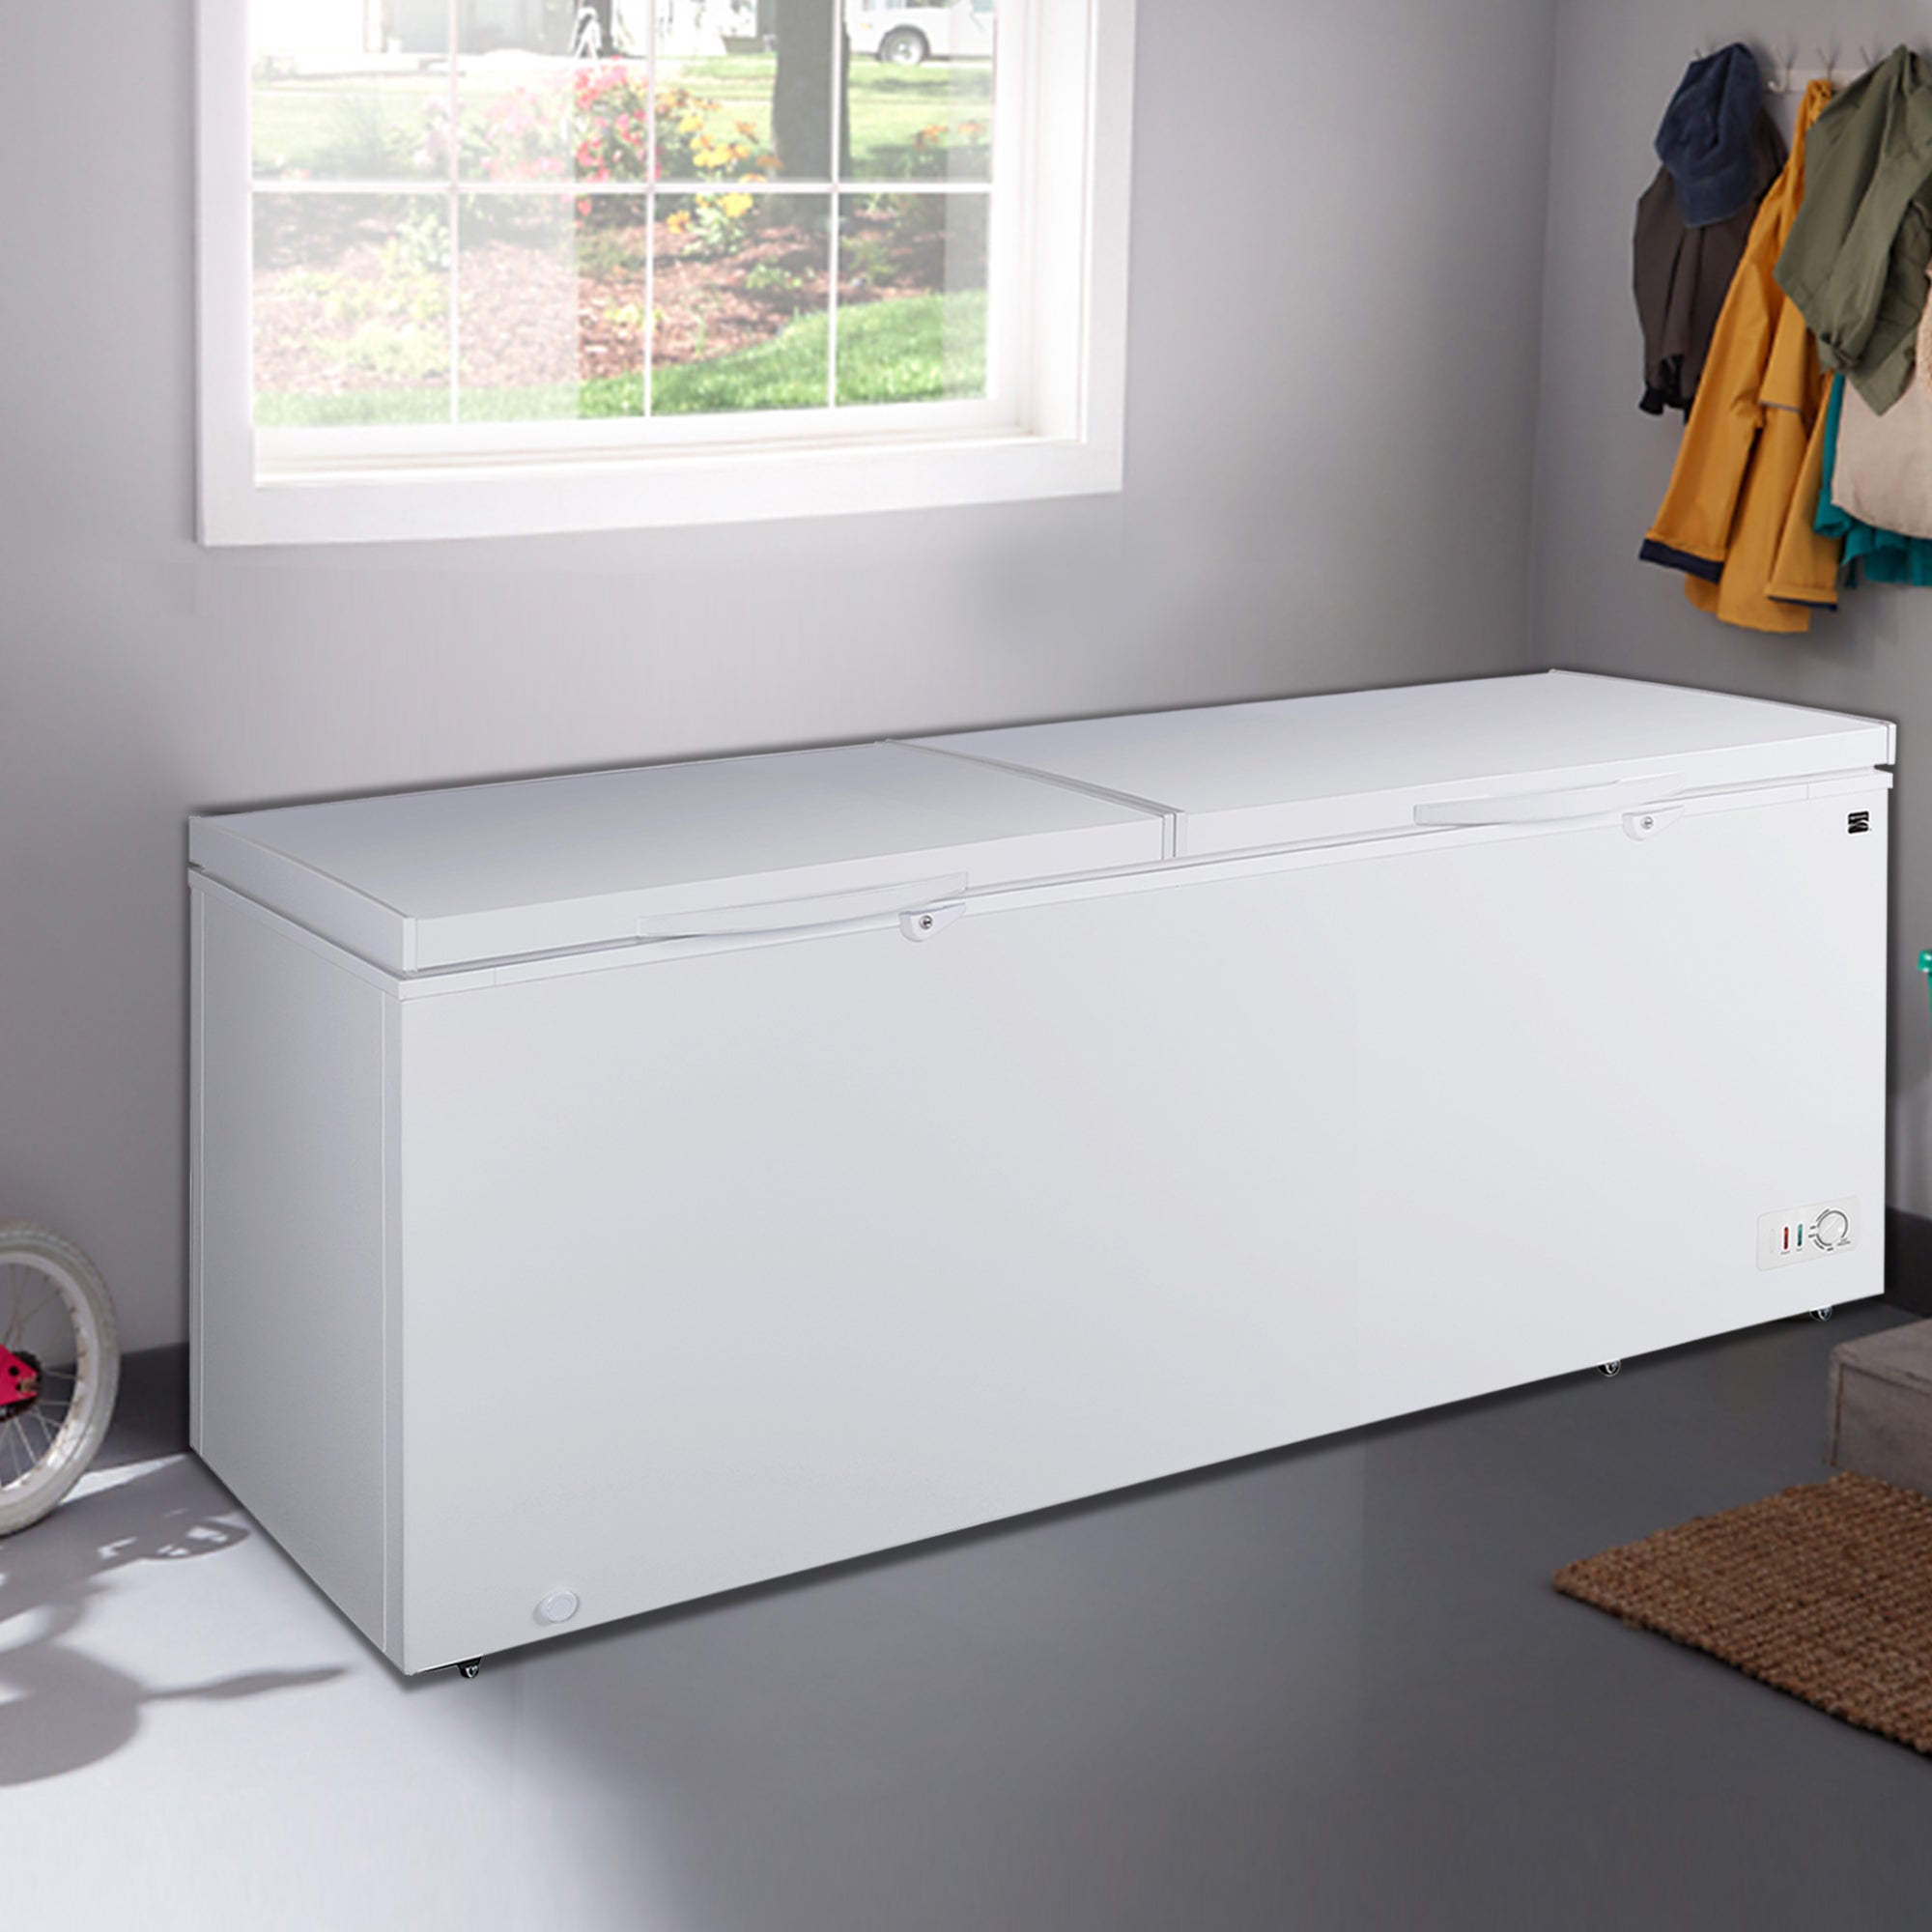 Kenmore convertible chest freezer/refrigerator, closed, in a mudroom with a window behind it